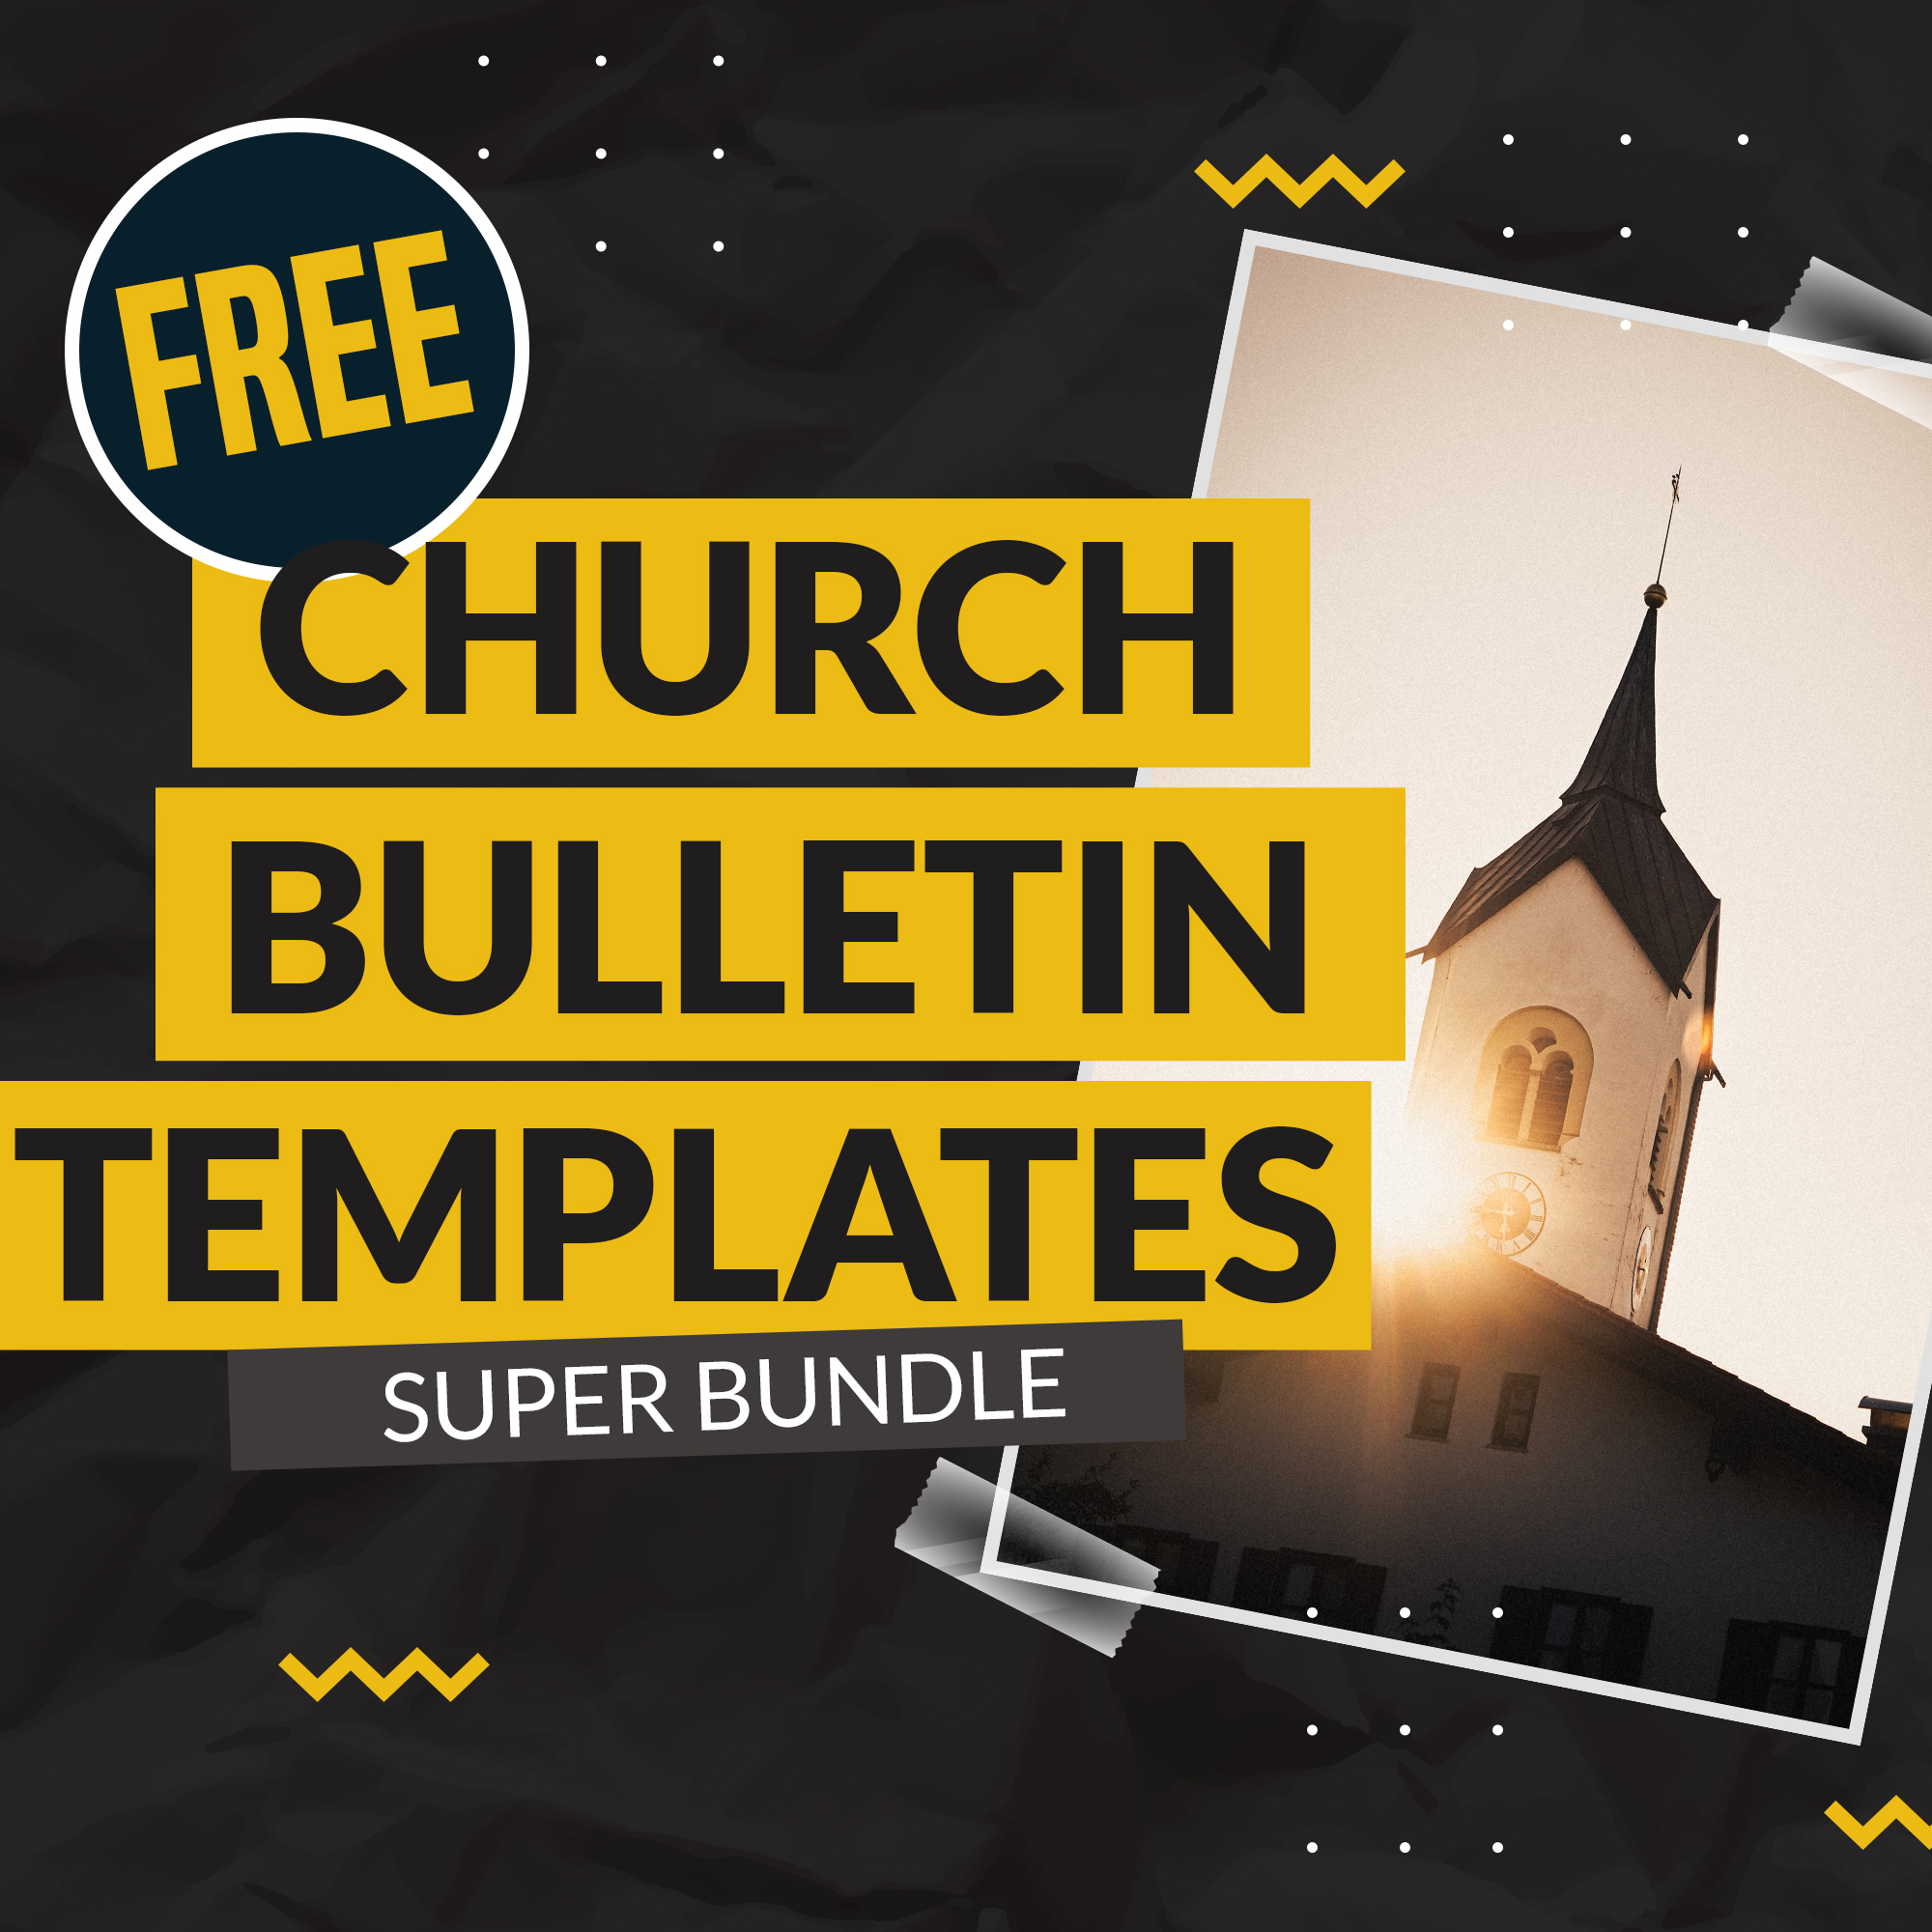 How to Effectively use Church Bulletin Templates - REACHRIGHT